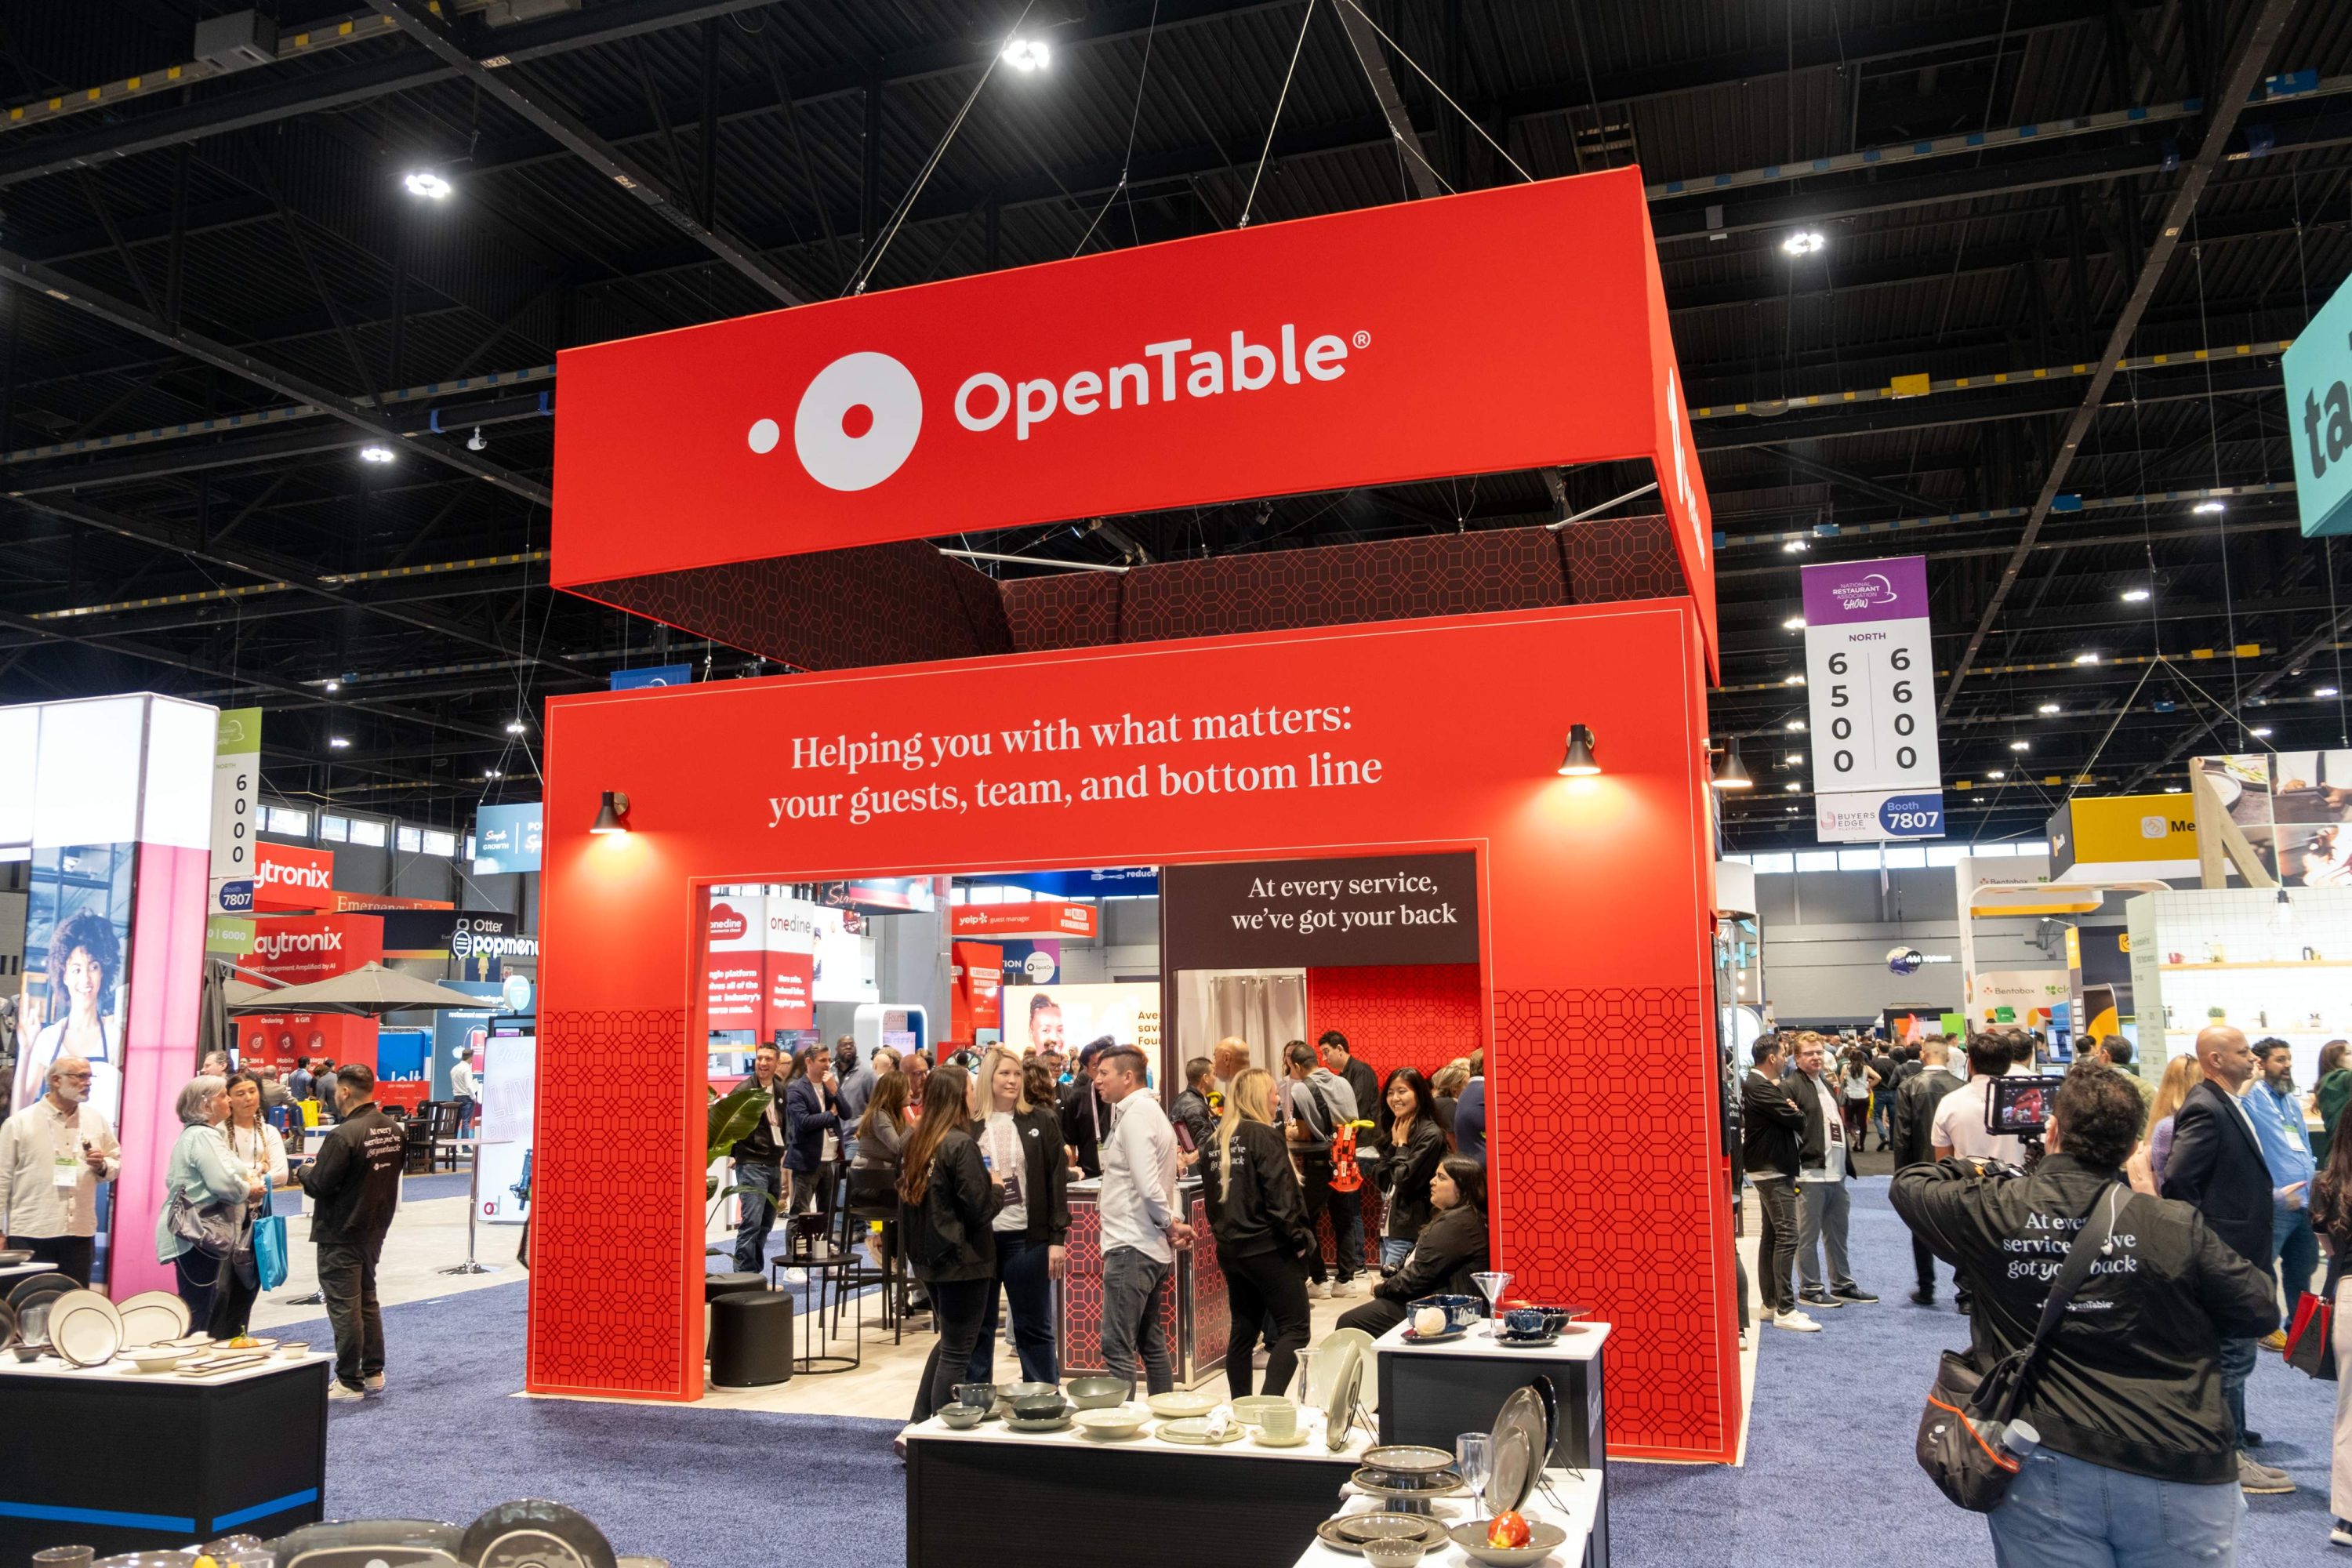 Busy OpenTable booth at a conference